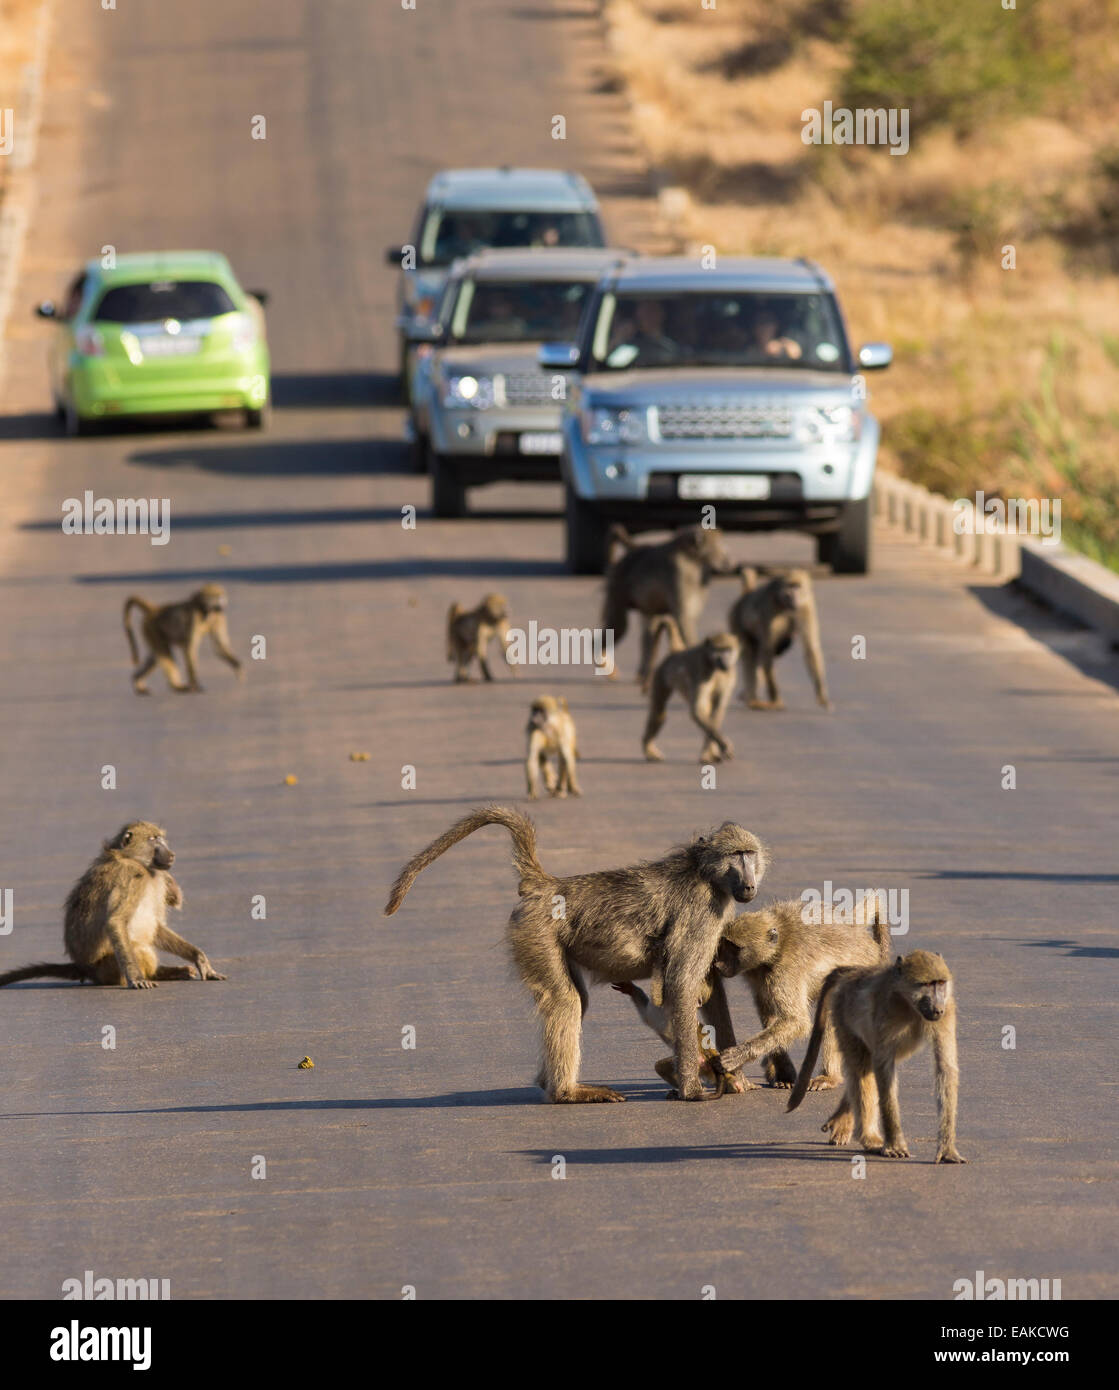 KRUGER NATIONAL PARK, SOUTH AFRICA - Baboons on road with cars. Stock Photo